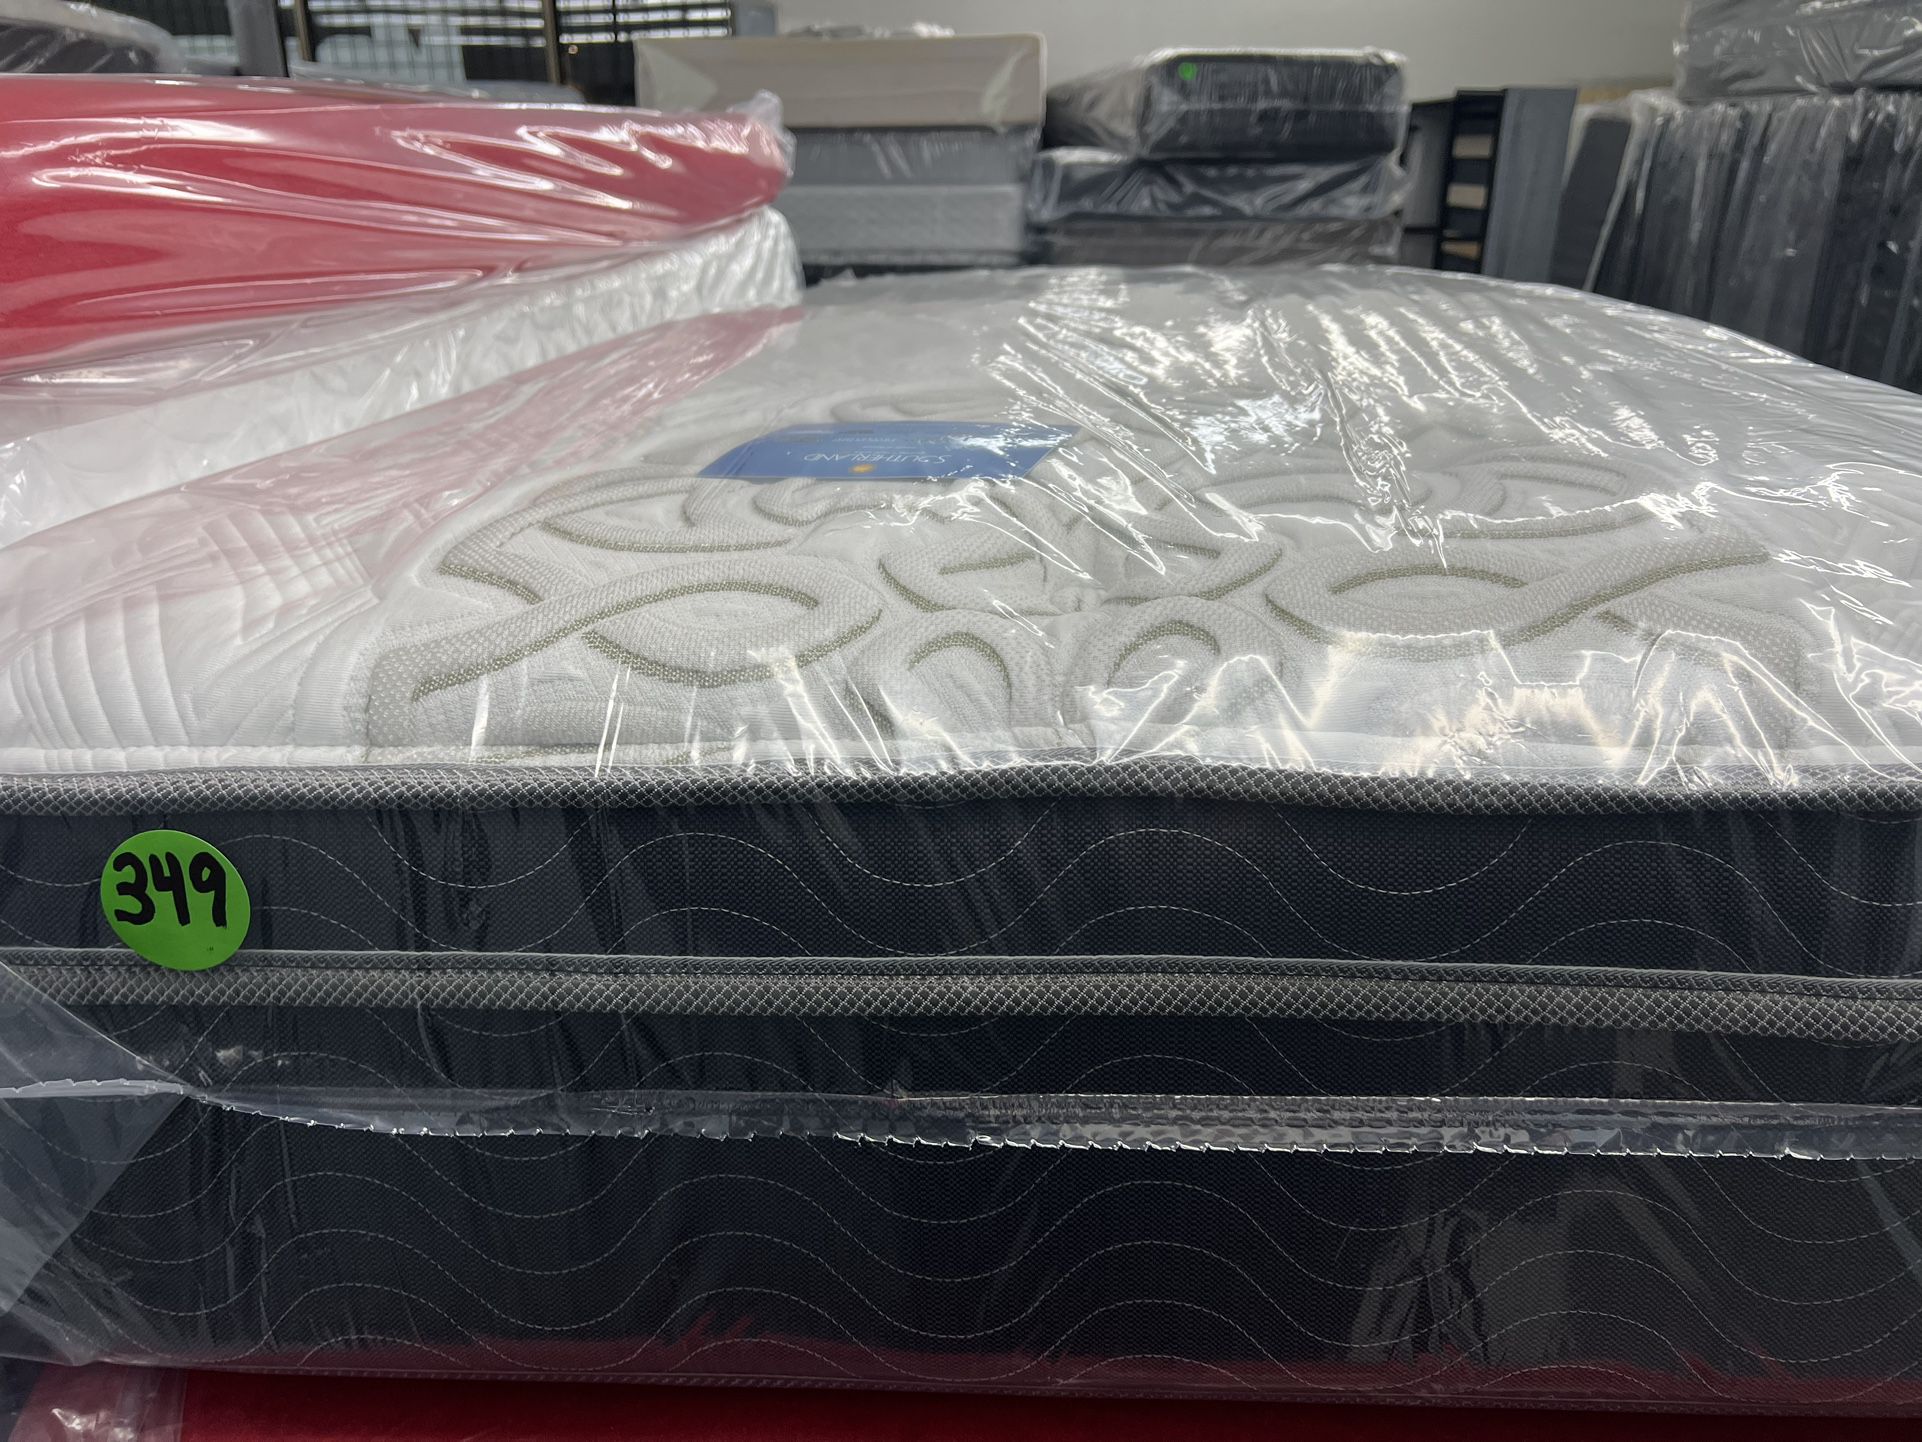 NEW WITH WARRANTY TWIN SIZE EUROTOP MATTRESS & BOX SPRINGS BED SET